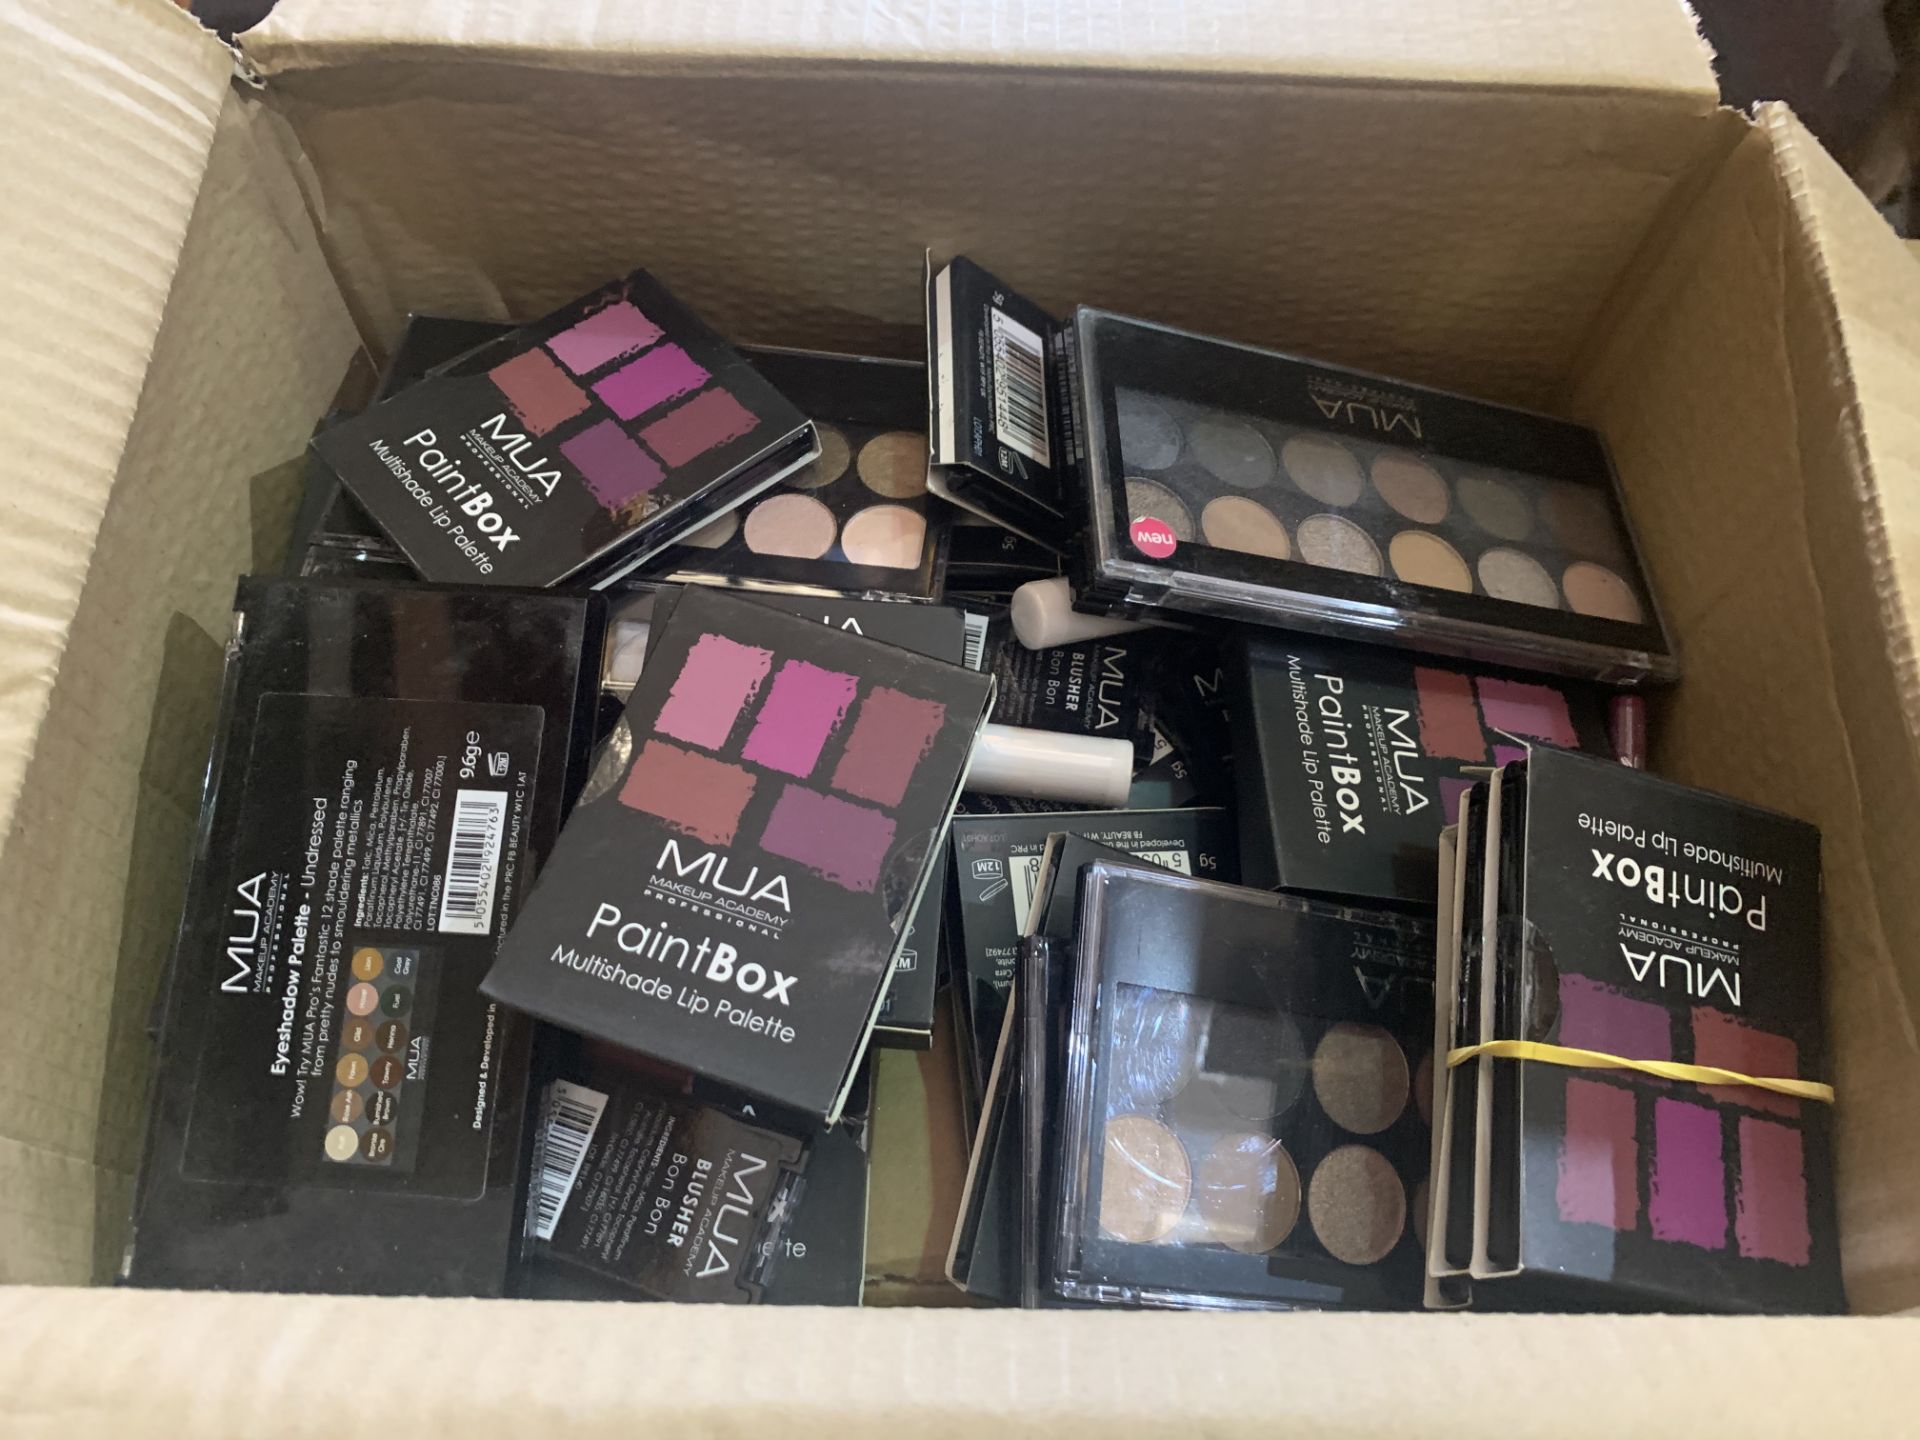 COSMETIC LOT CONTAINING APPROX 200 VARIOUS PIECES OF MAKE - UP IN 1 BOX - Image 2 of 2